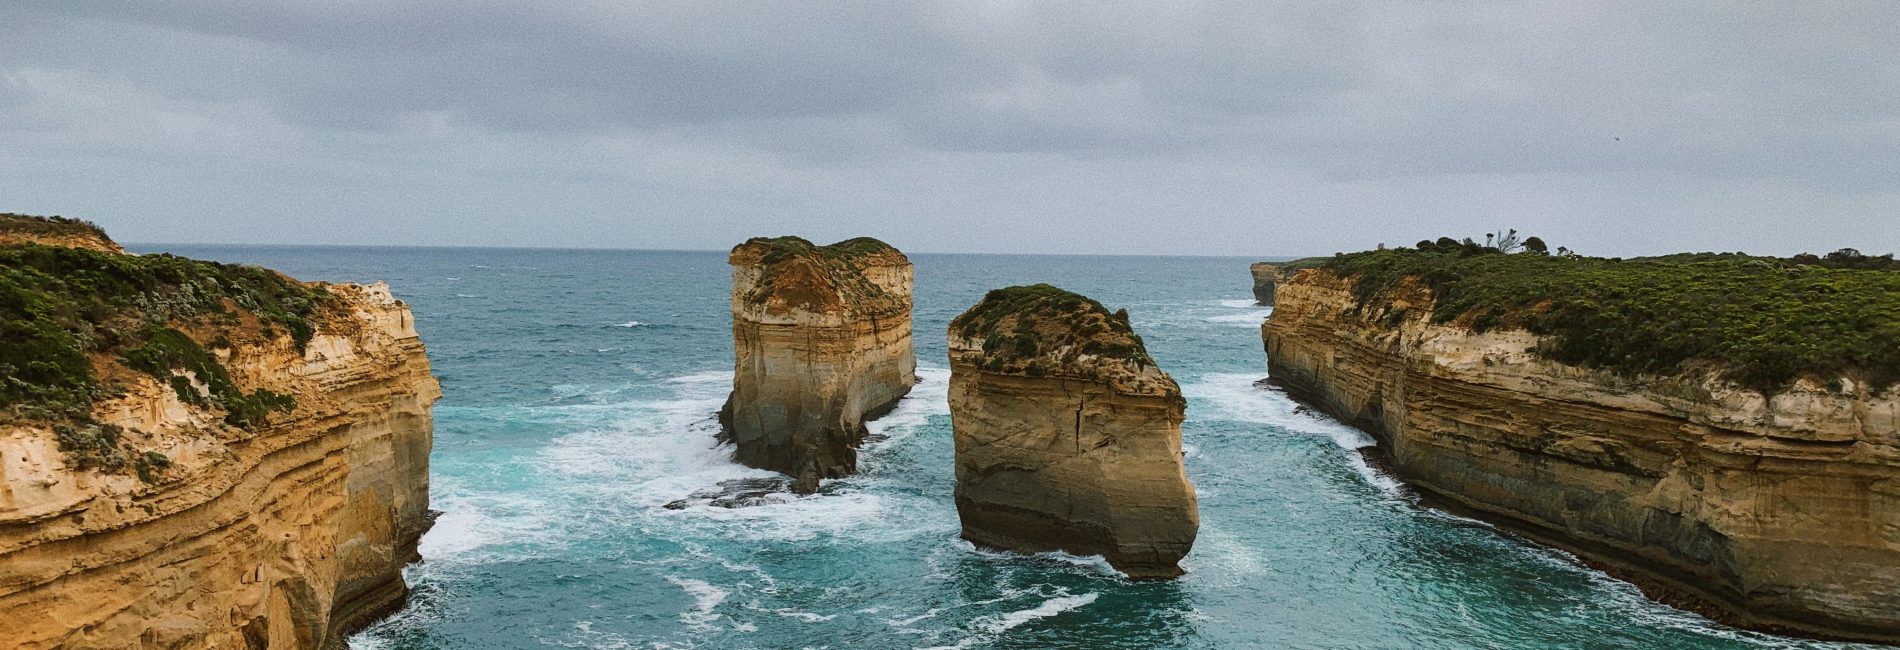 10 Things You Can’t Miss On The Great Ocean Road